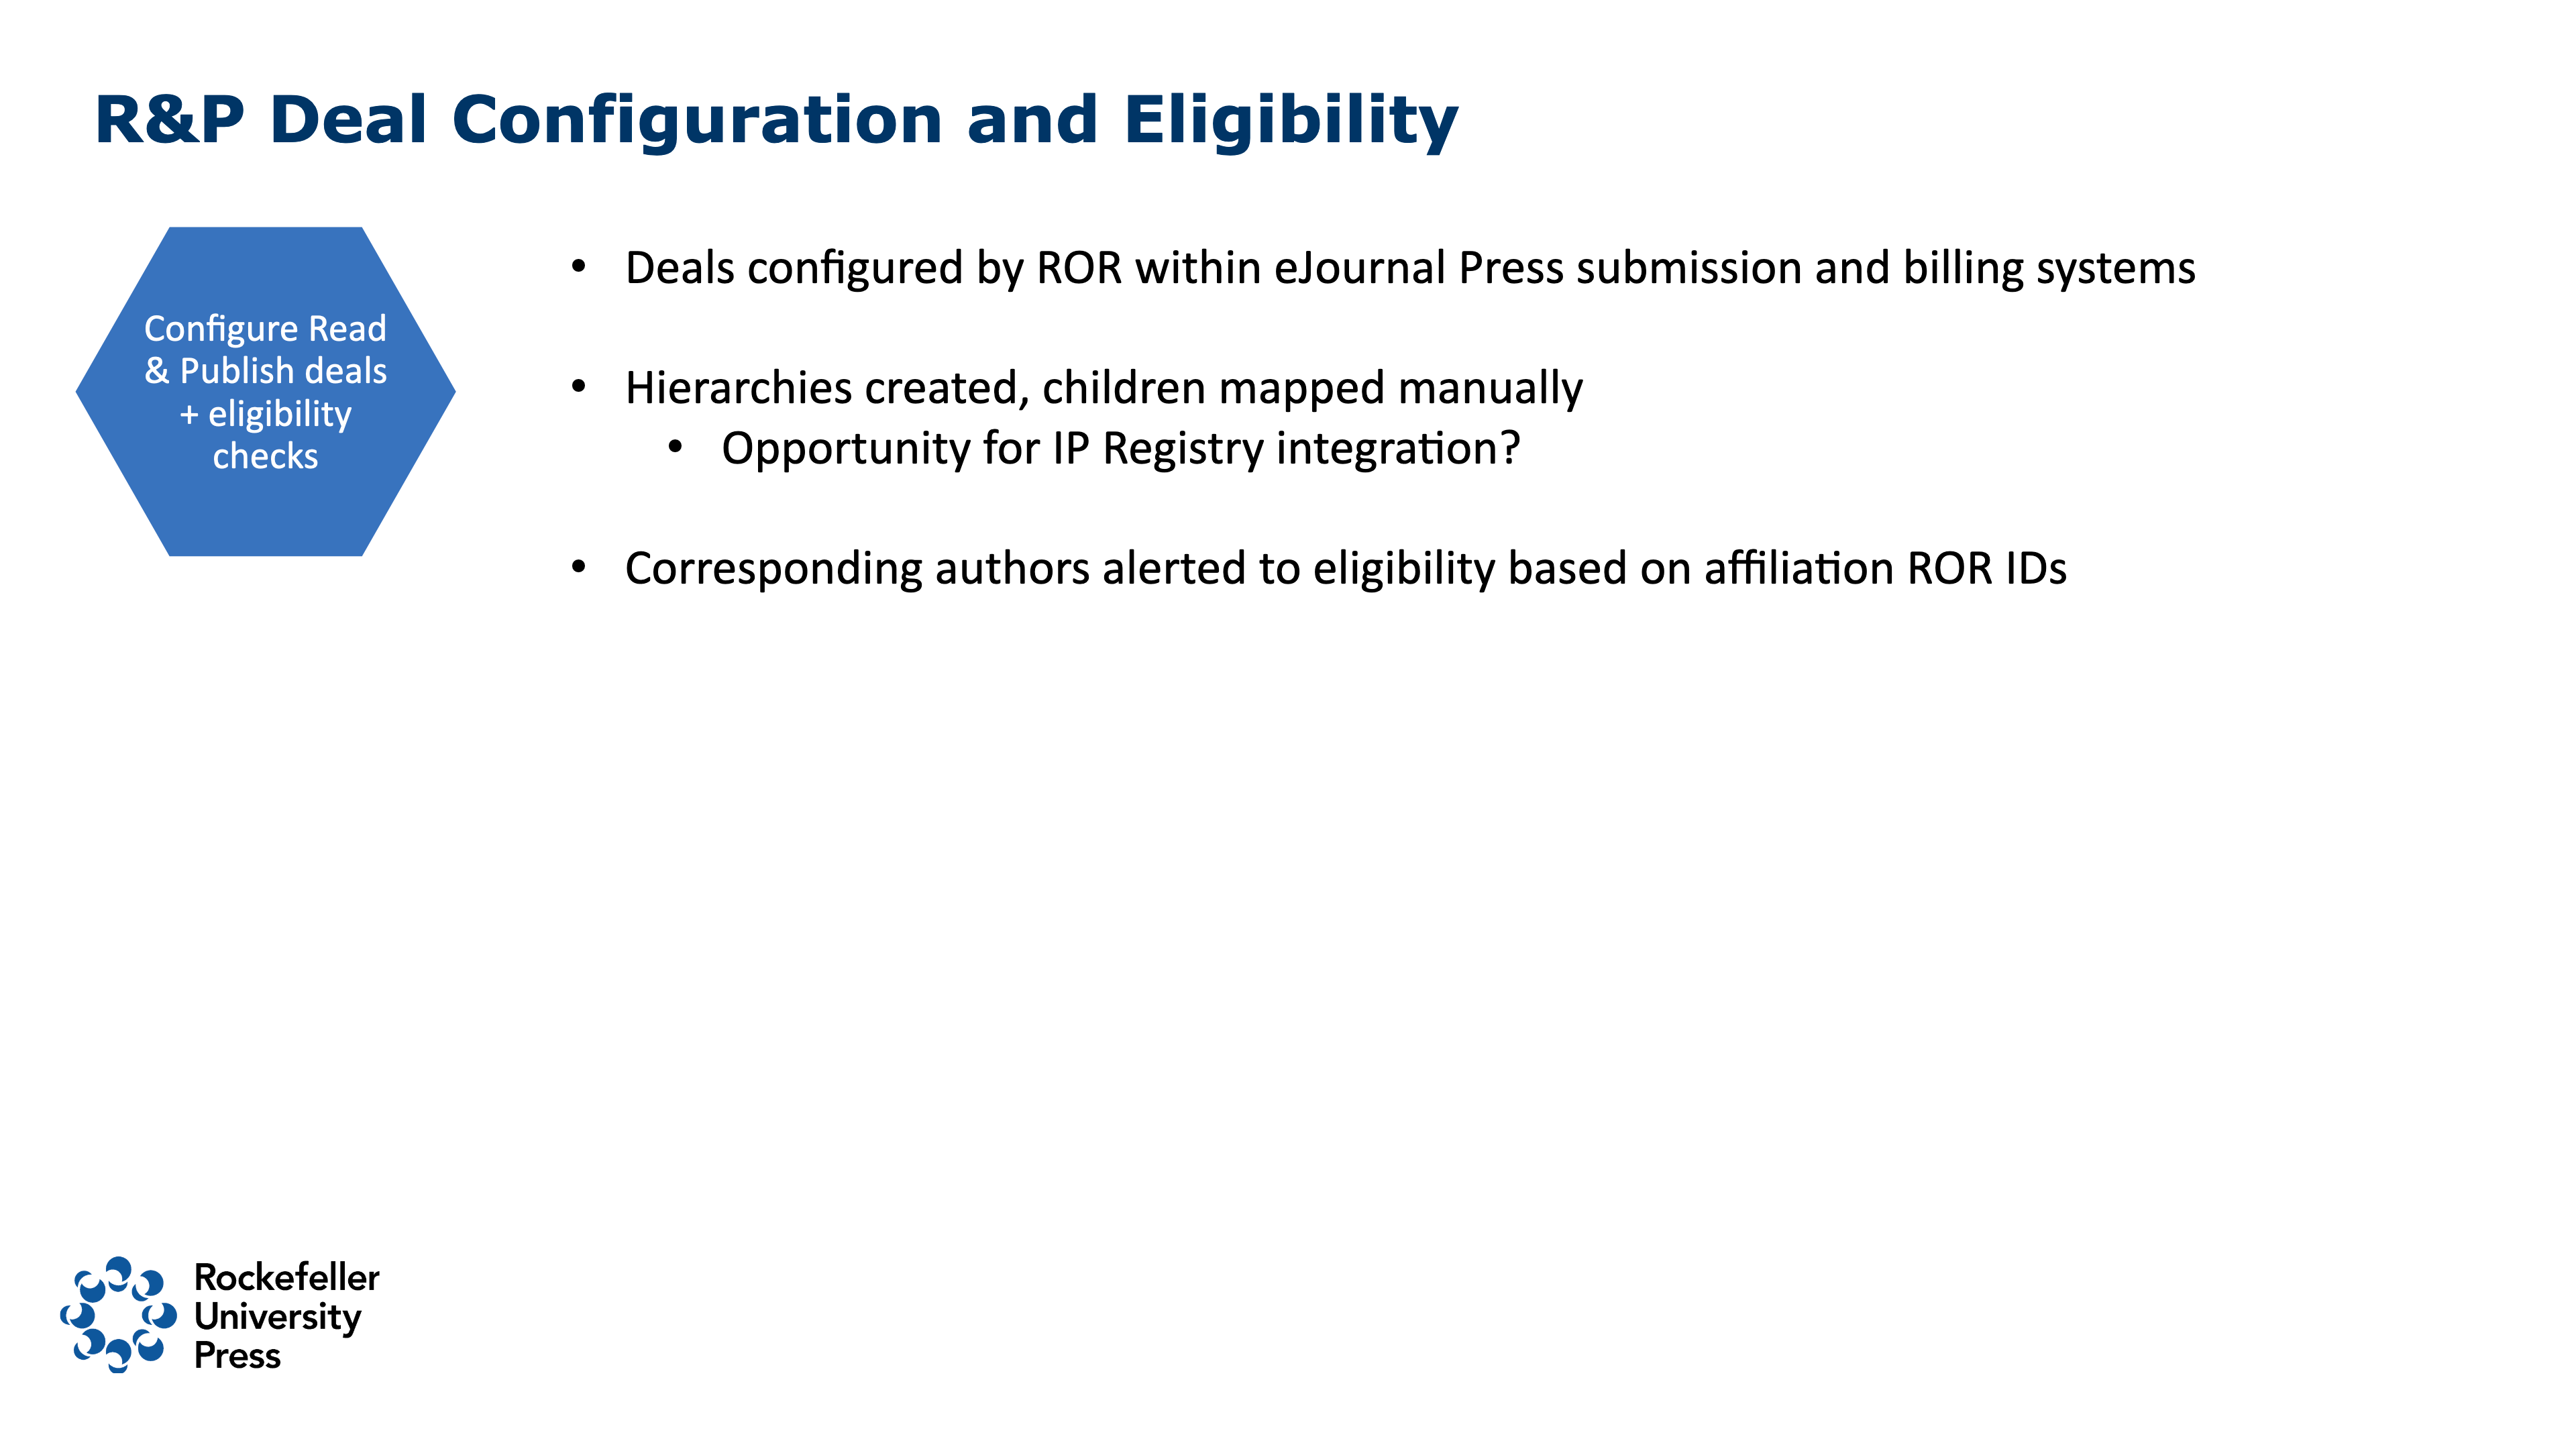 Read and Publish deal configuration and eligibility: Deals configured by ROR within eJournalPress submission and billing systems, hierarchies created and children mapped manually, opportunity for IP Registry integration, corresponding authors alerted to eligibility based on affiliation ROR IDs